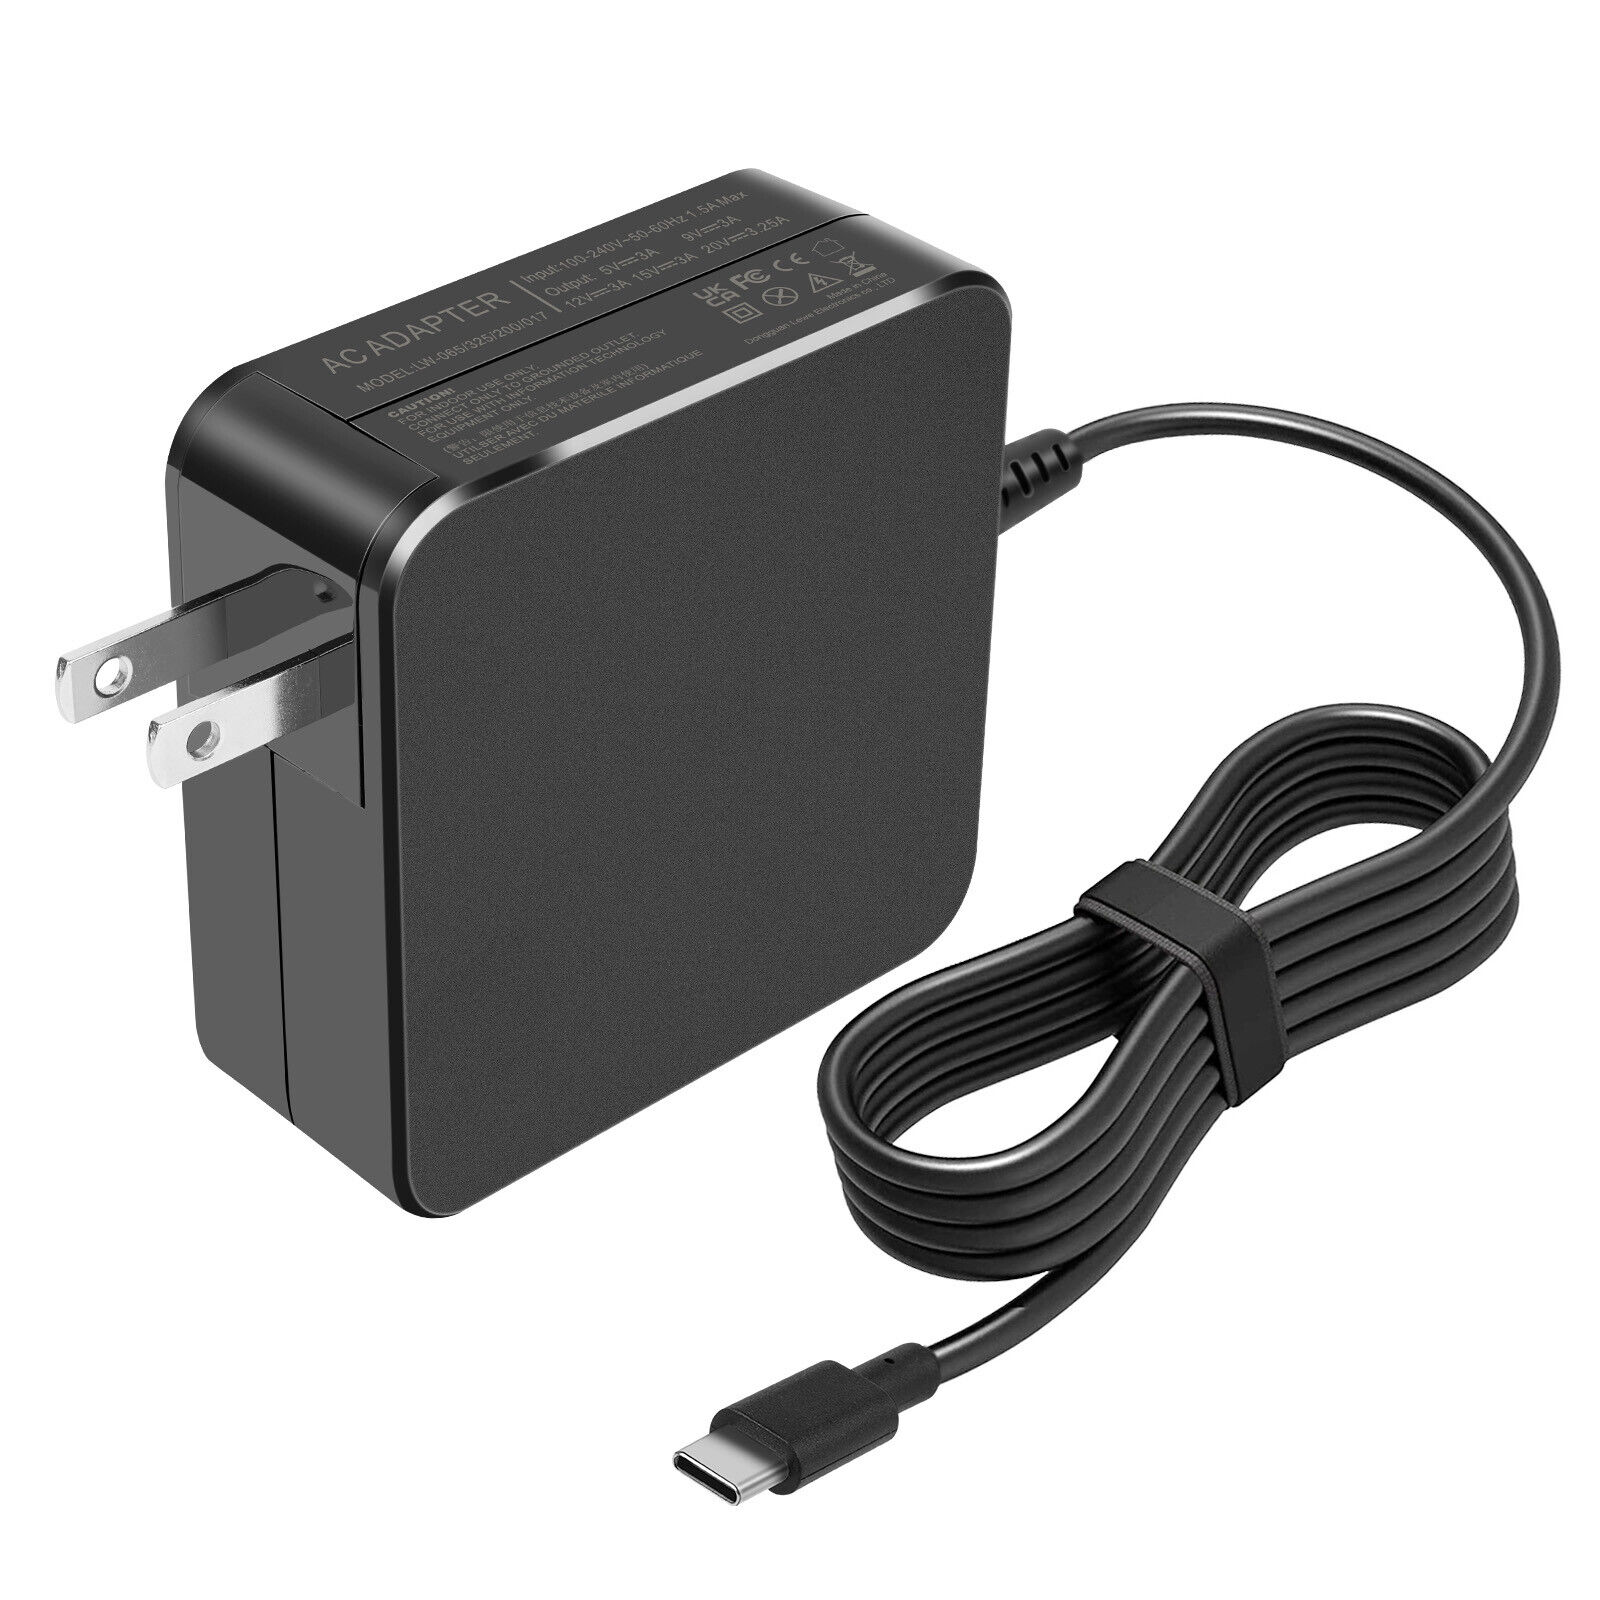 AC Adapter Charger For LG gram 17Z90P 17Z95P 17Z90Q Laptop USB-C Power Supply